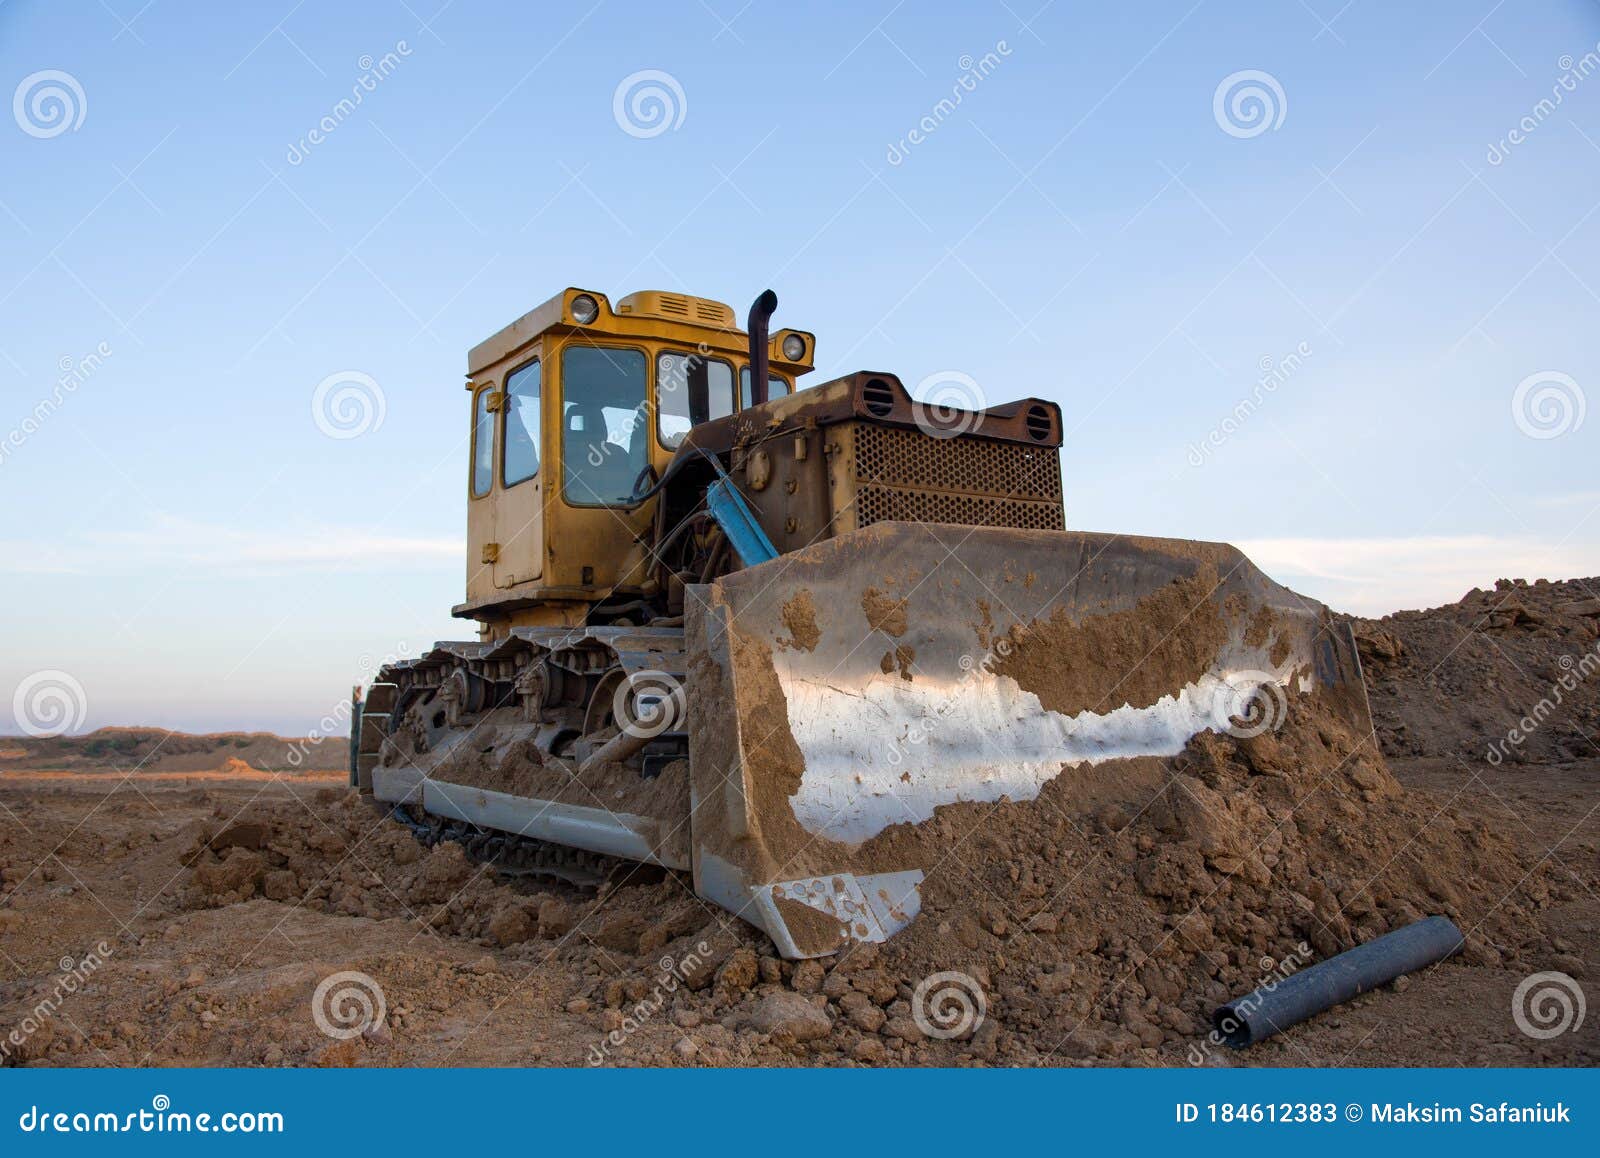 dozer at open pit mining on sunseet background. bulldozer for land clearing, grading, pool excavation, utility trenching and